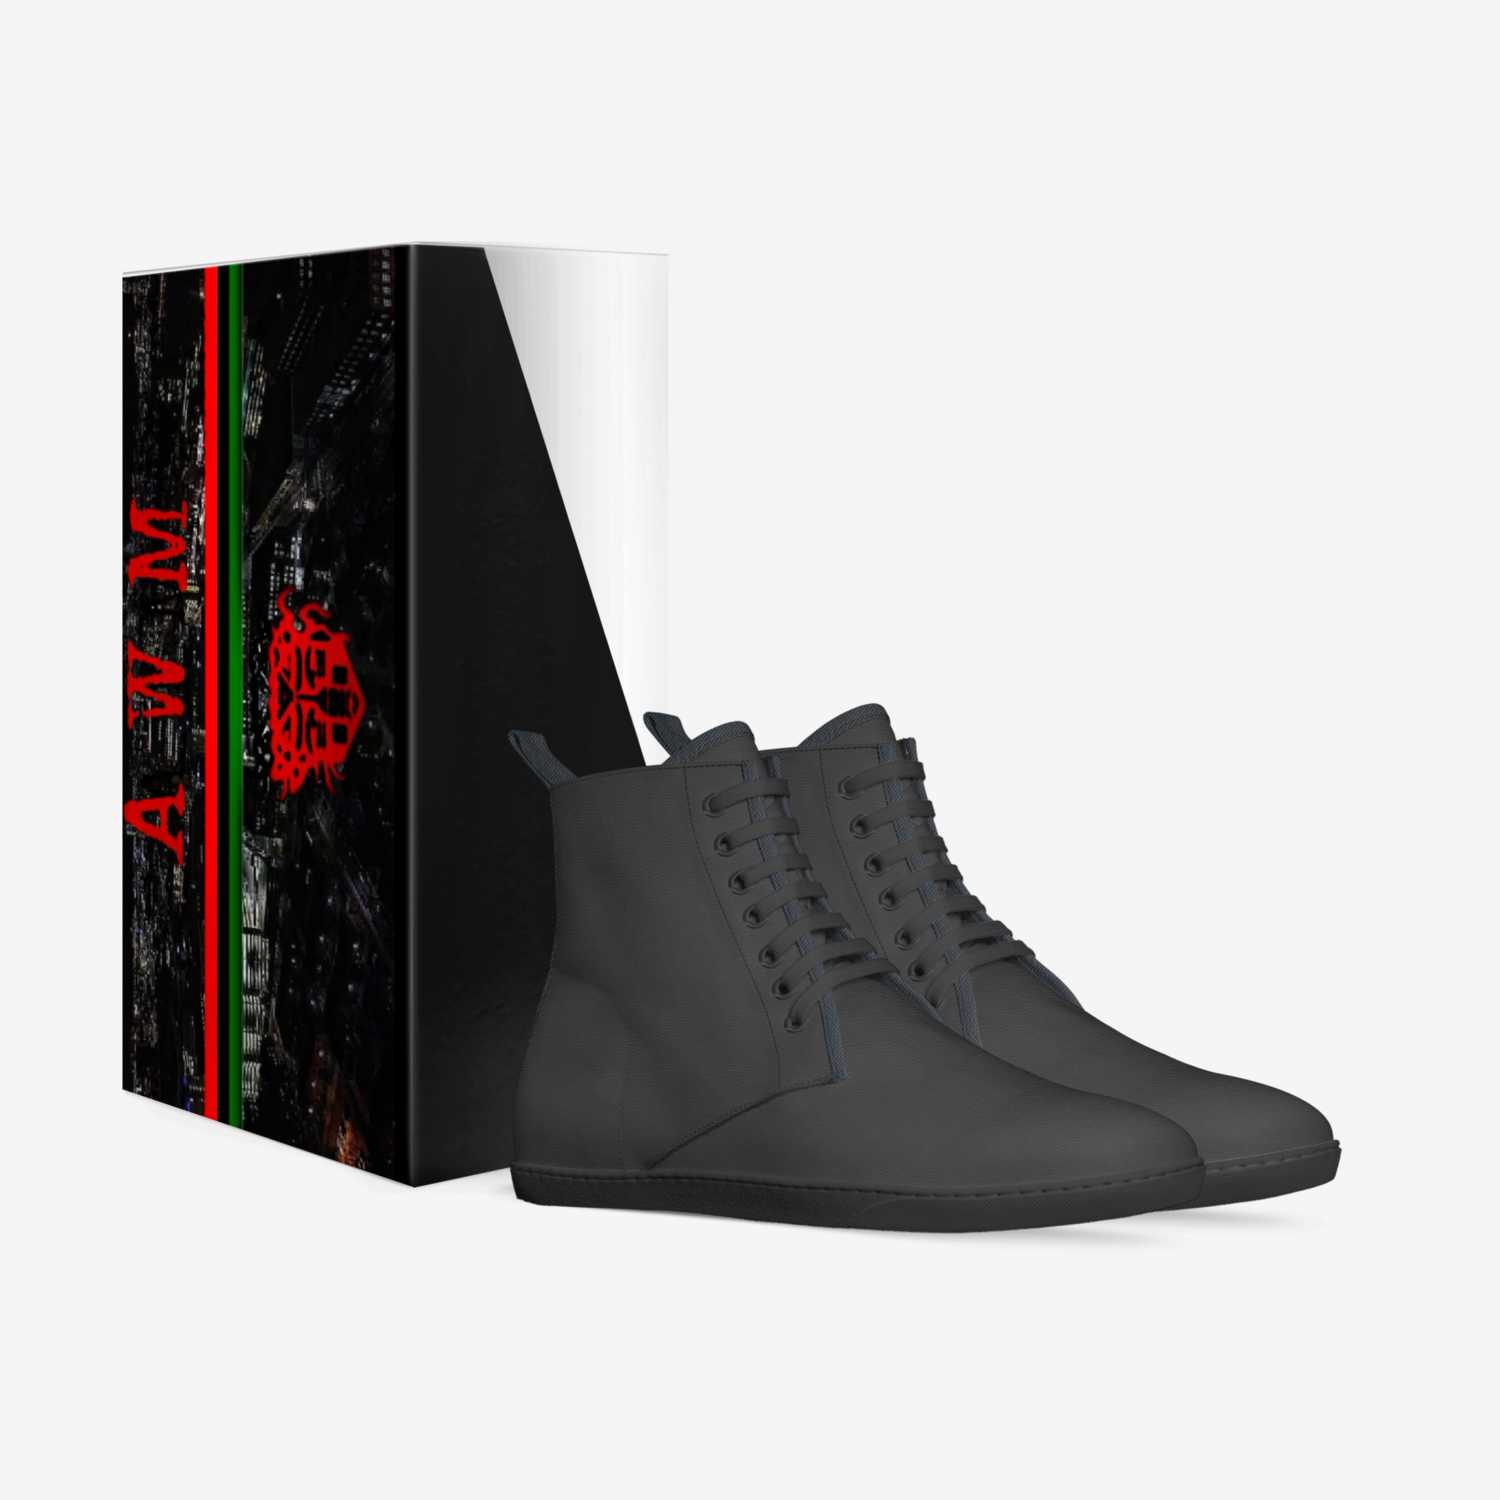 Awmp custom made in Italy shoes by African War Mask | Box view